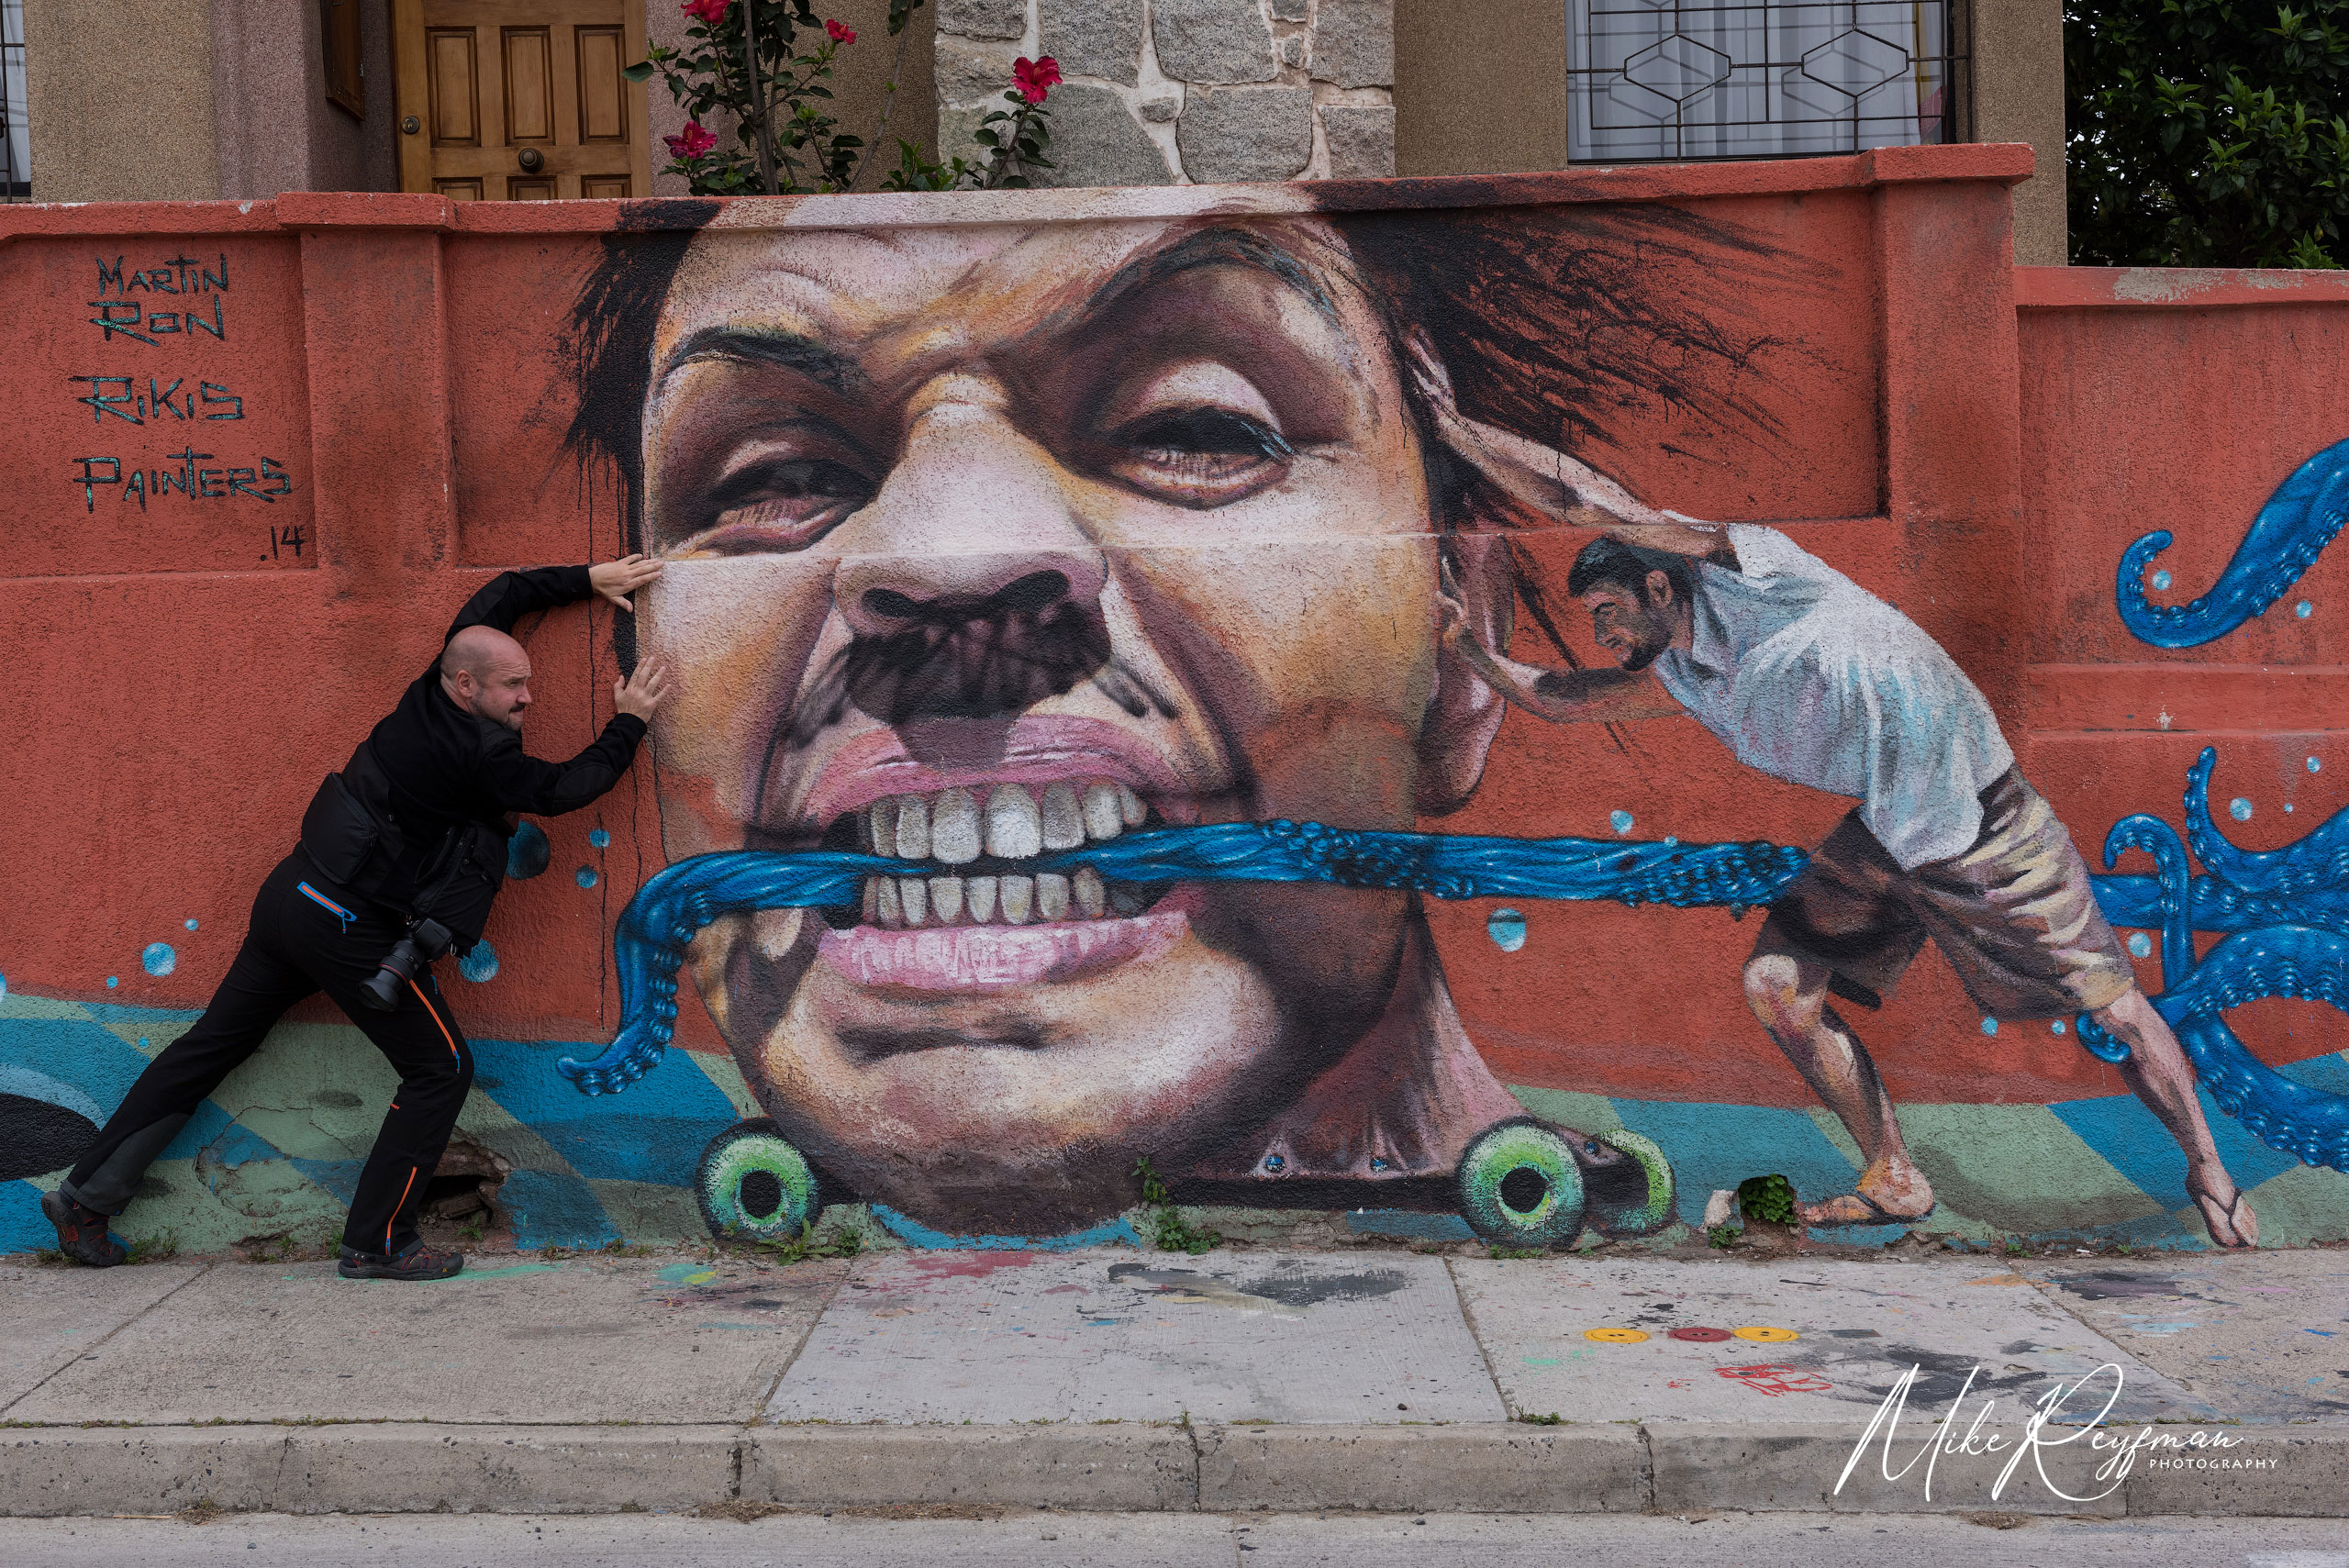 Valparaiso, Chile. The Graffiti Capital of the World 058-VP _D1D0181 - Valparaiso, Chile. The Graffiti Capital of the World - Mike Reyfman Photography